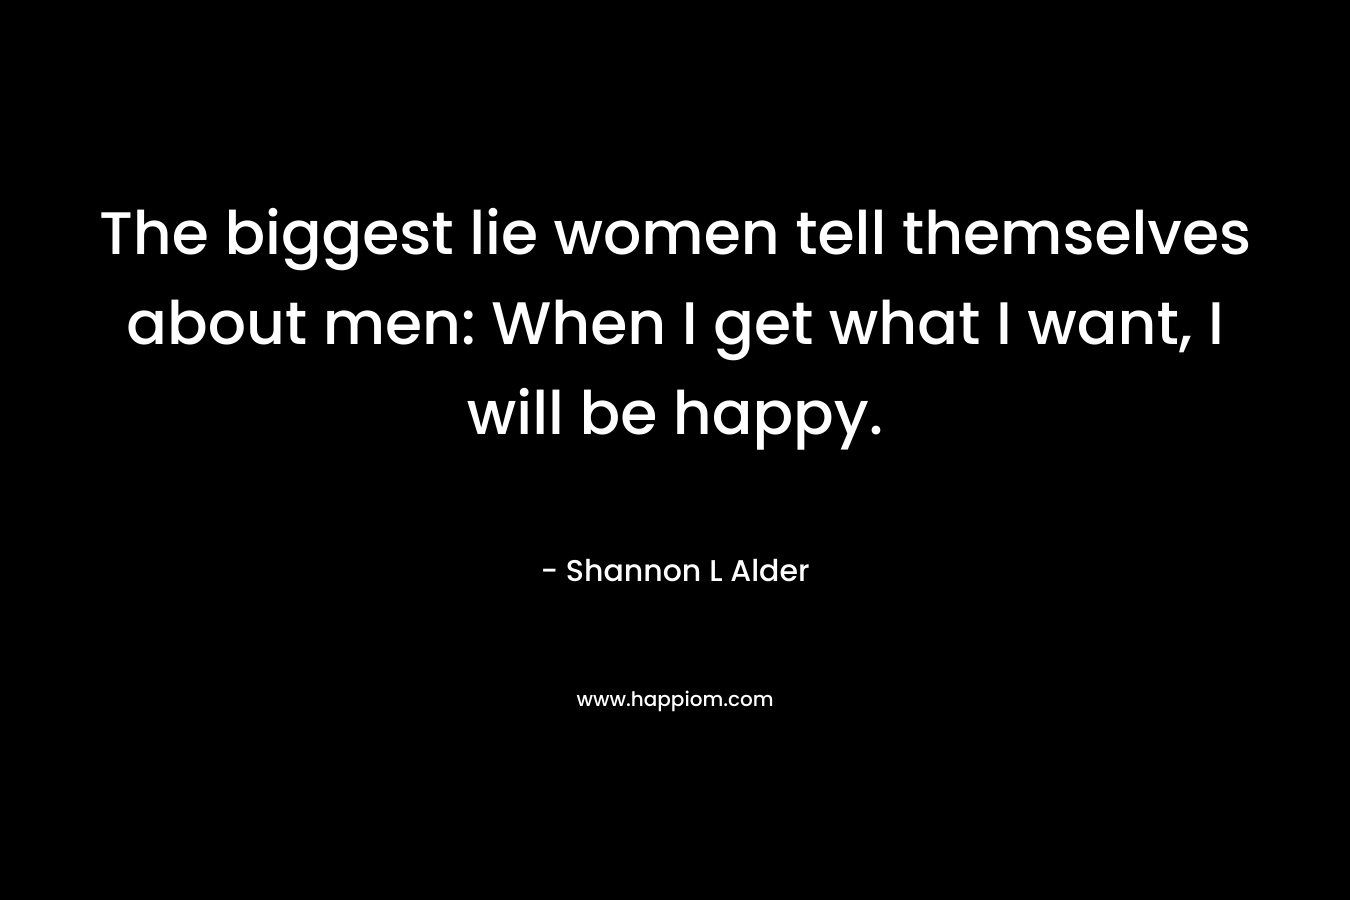 The biggest lie women tell themselves about men: When I get what I want, I will be happy.